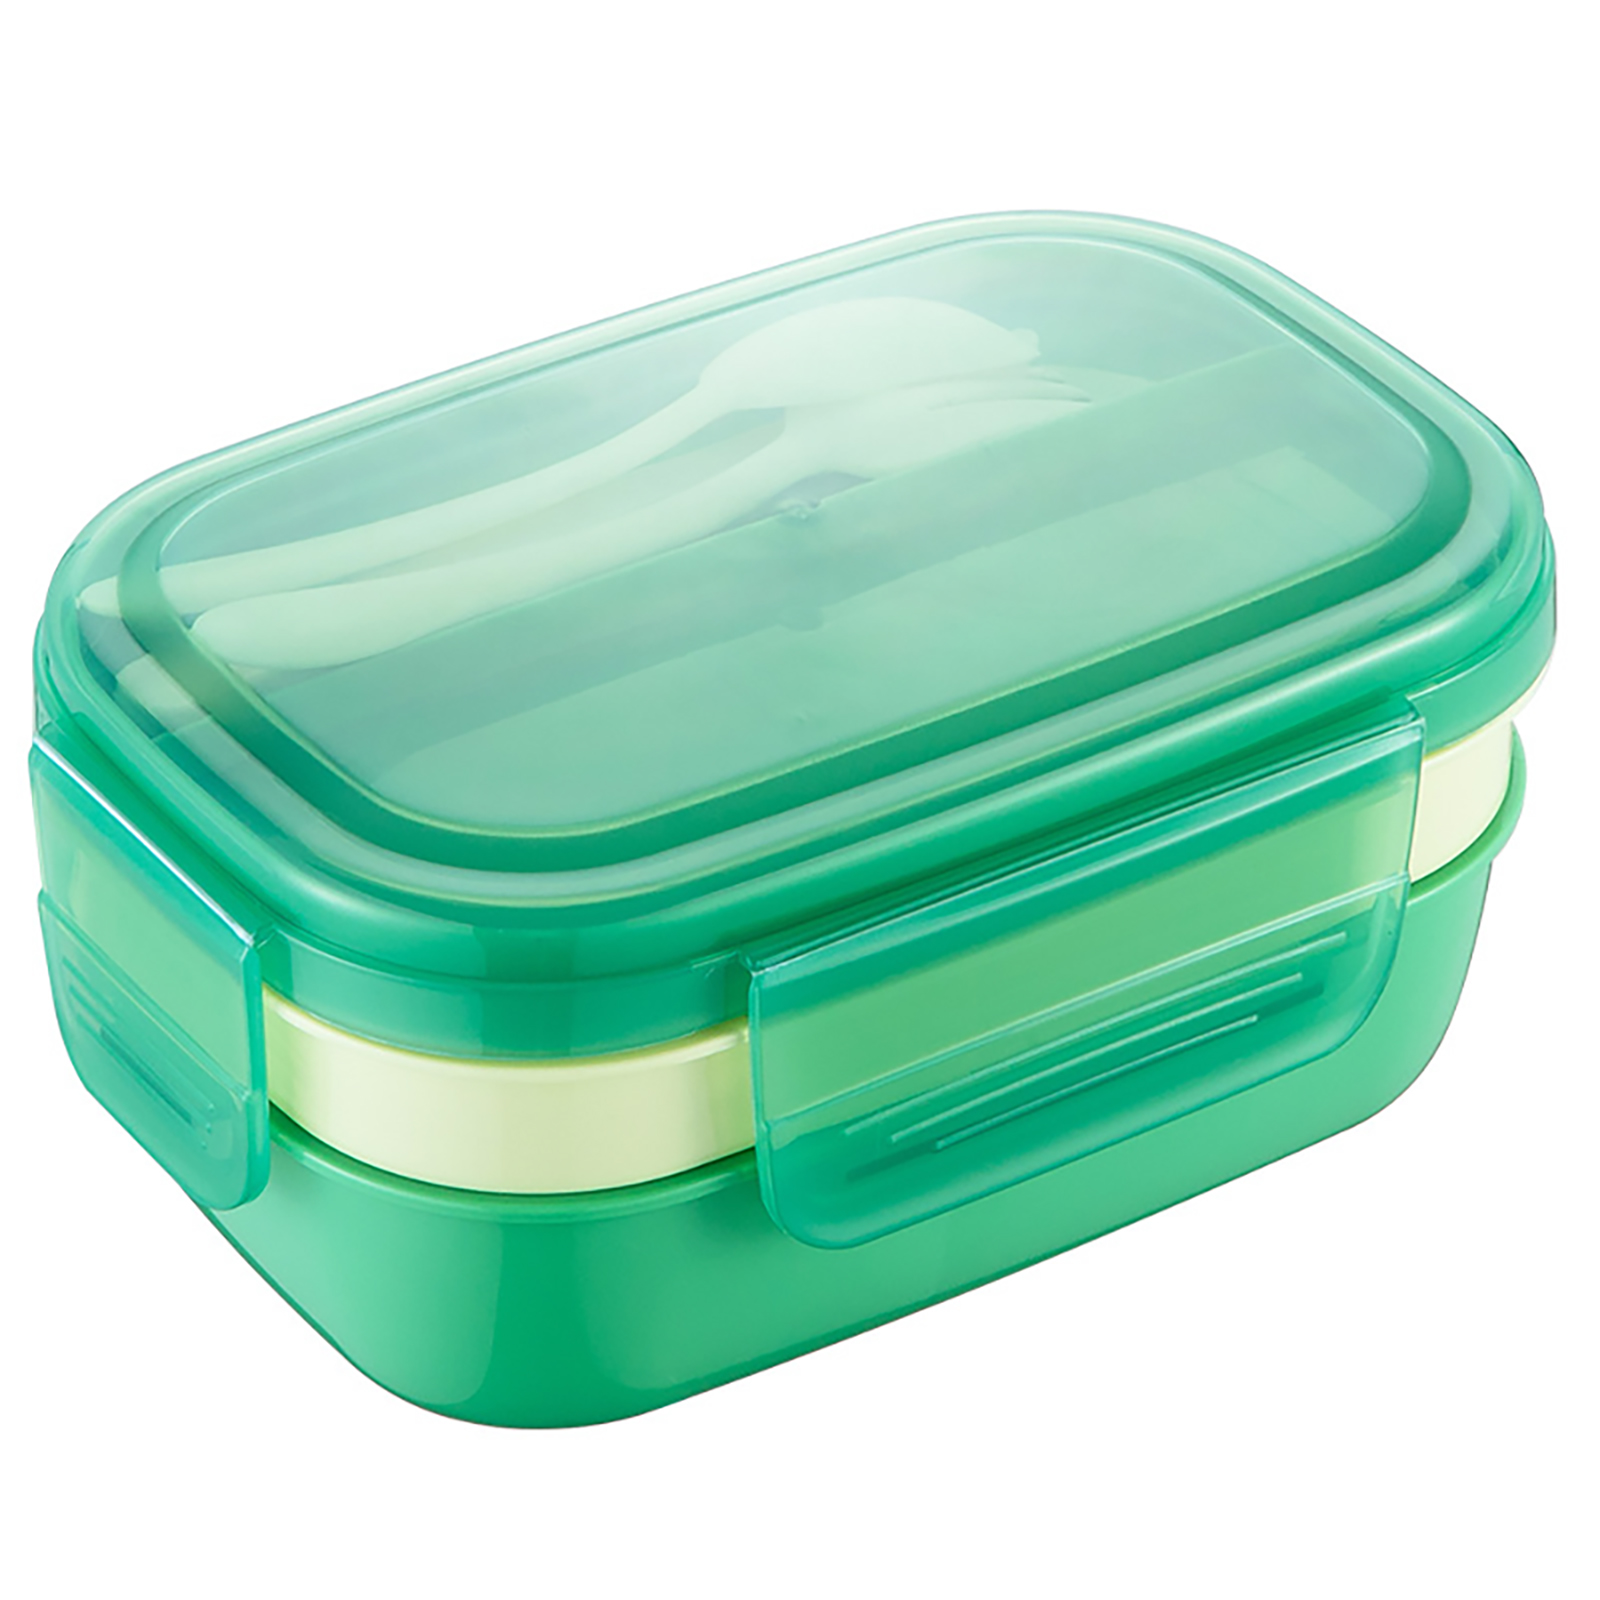 Student Bento Lunch Box With Cutlery 1900ml Large Capacity Microwave Freezer Dishwasher Safe Leak-Proof Food Box